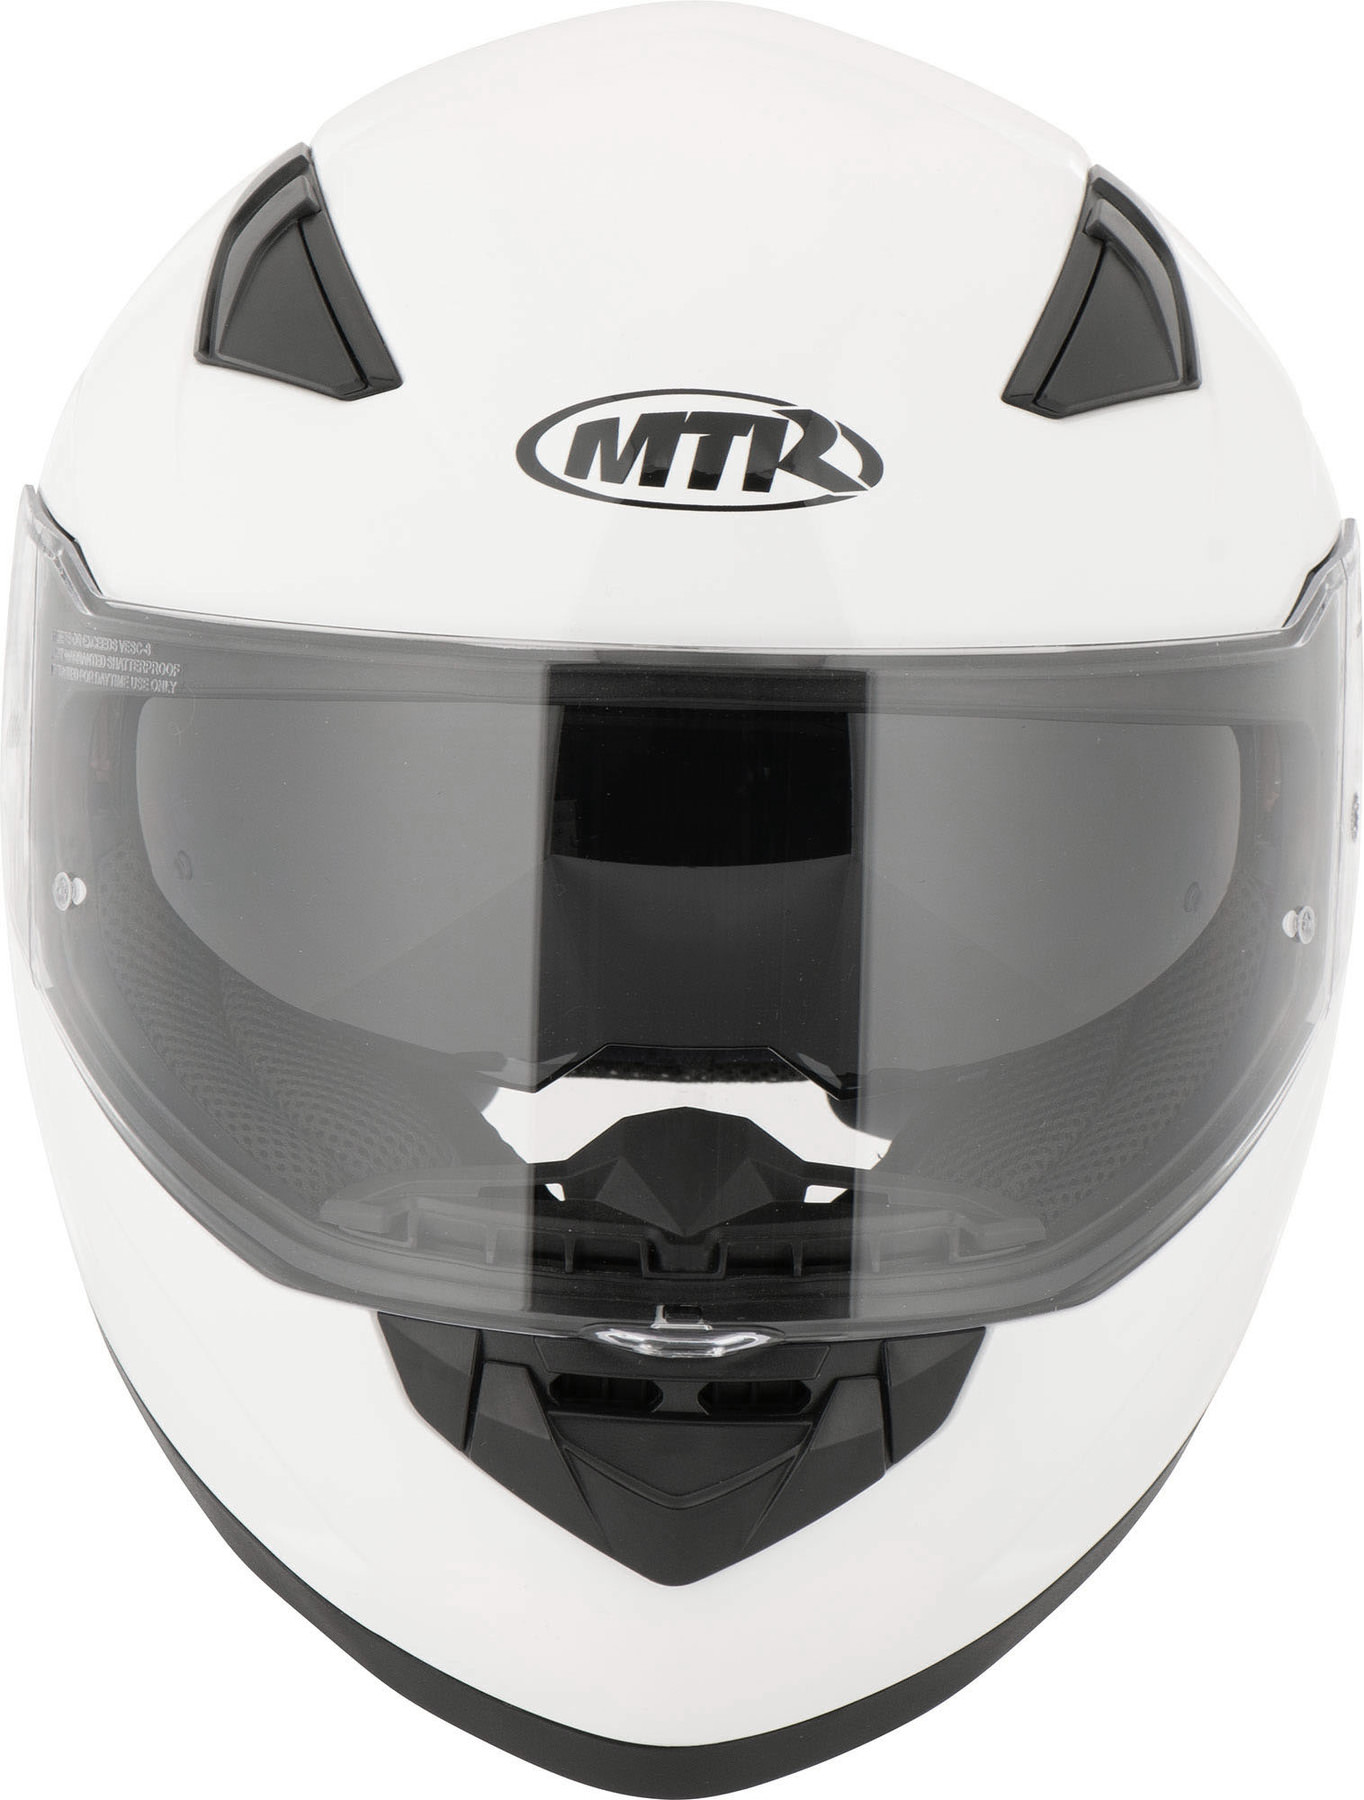 Buy MTR S 12 Full Face Helmet Louis motorcycle clothing and technology